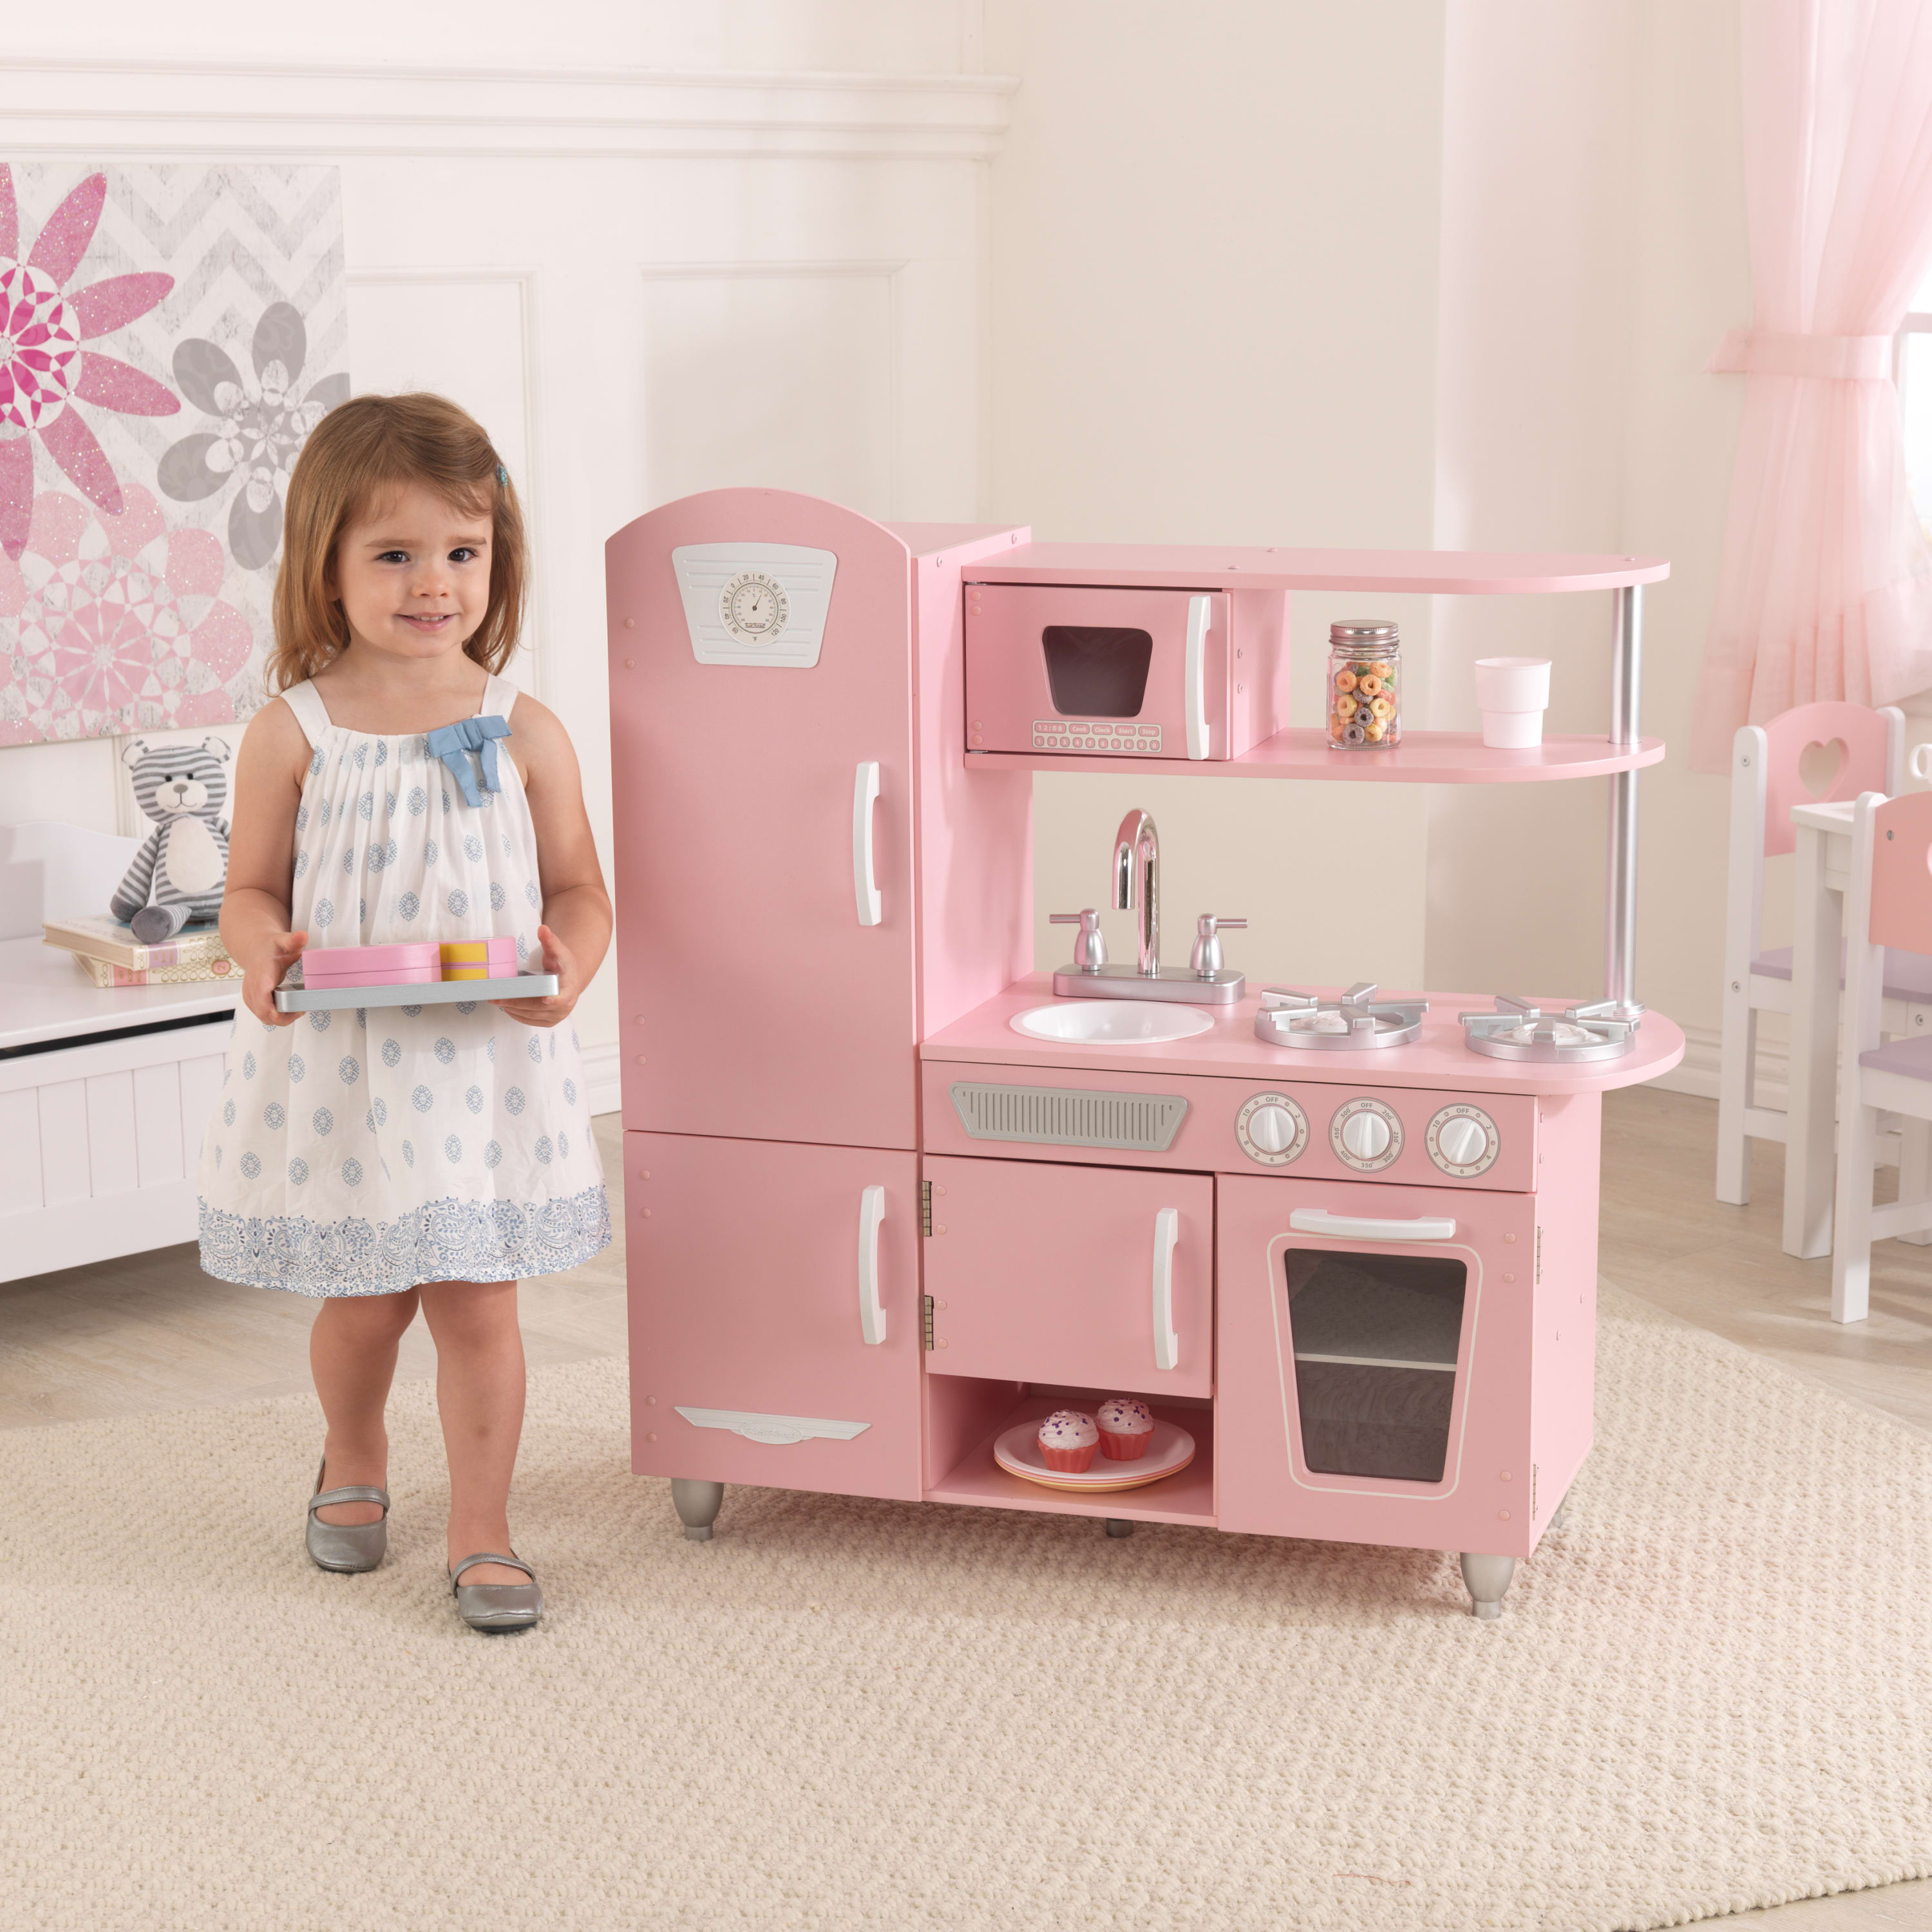 KidKraft Vintage Wooden Play Kitchen with Working Knobs, Pink - image 2 of 7